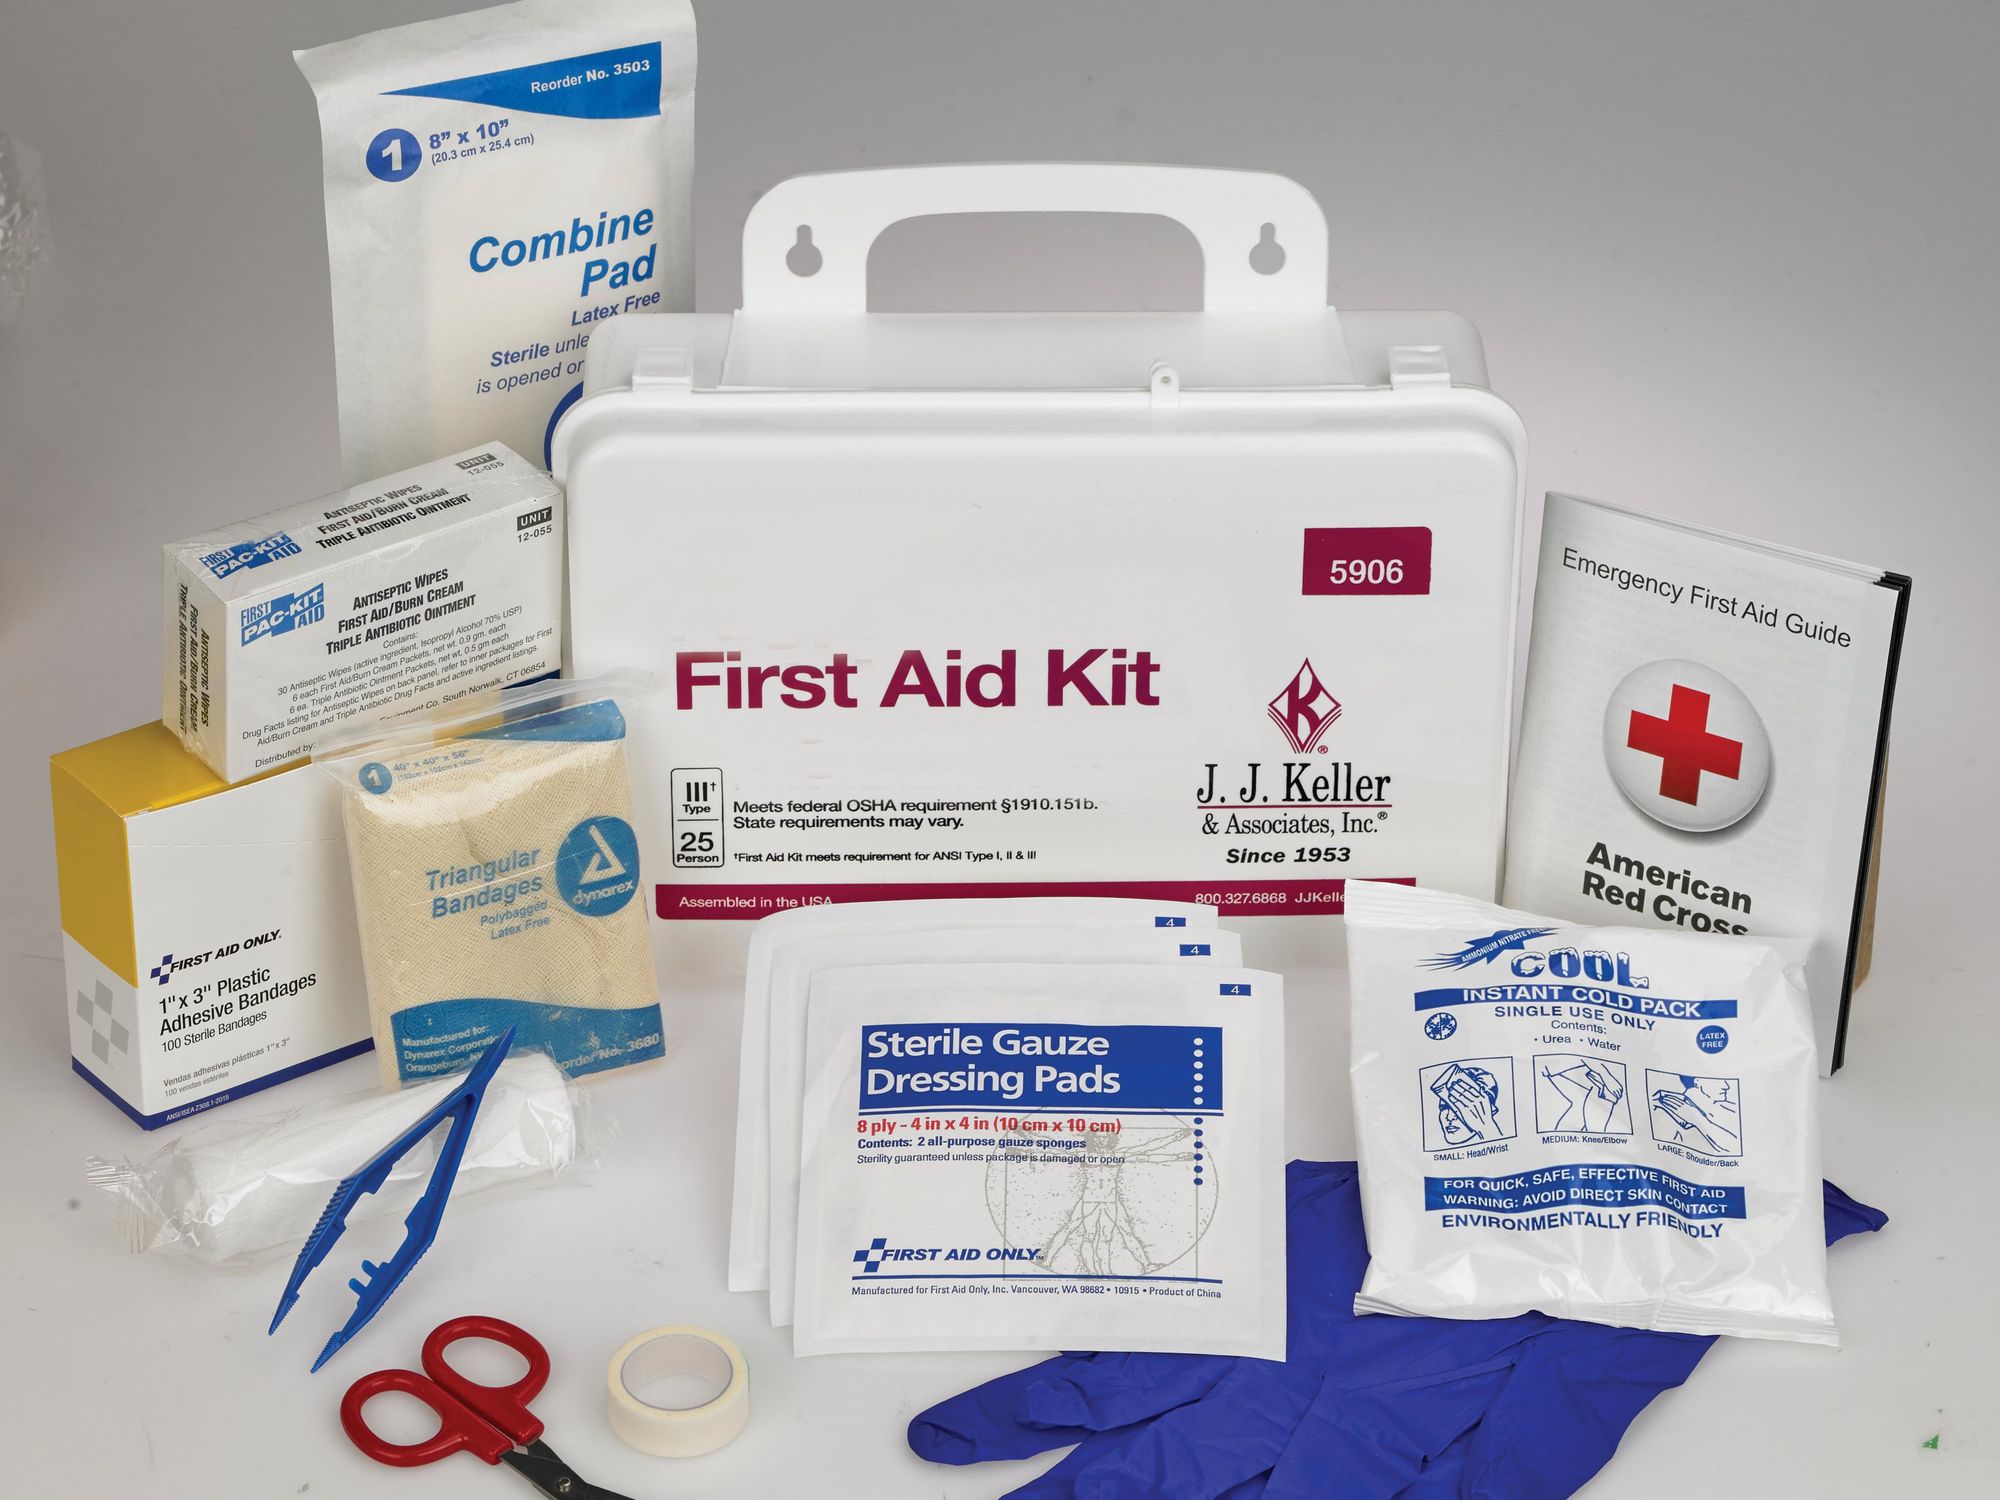 First-aid kits for emergencies